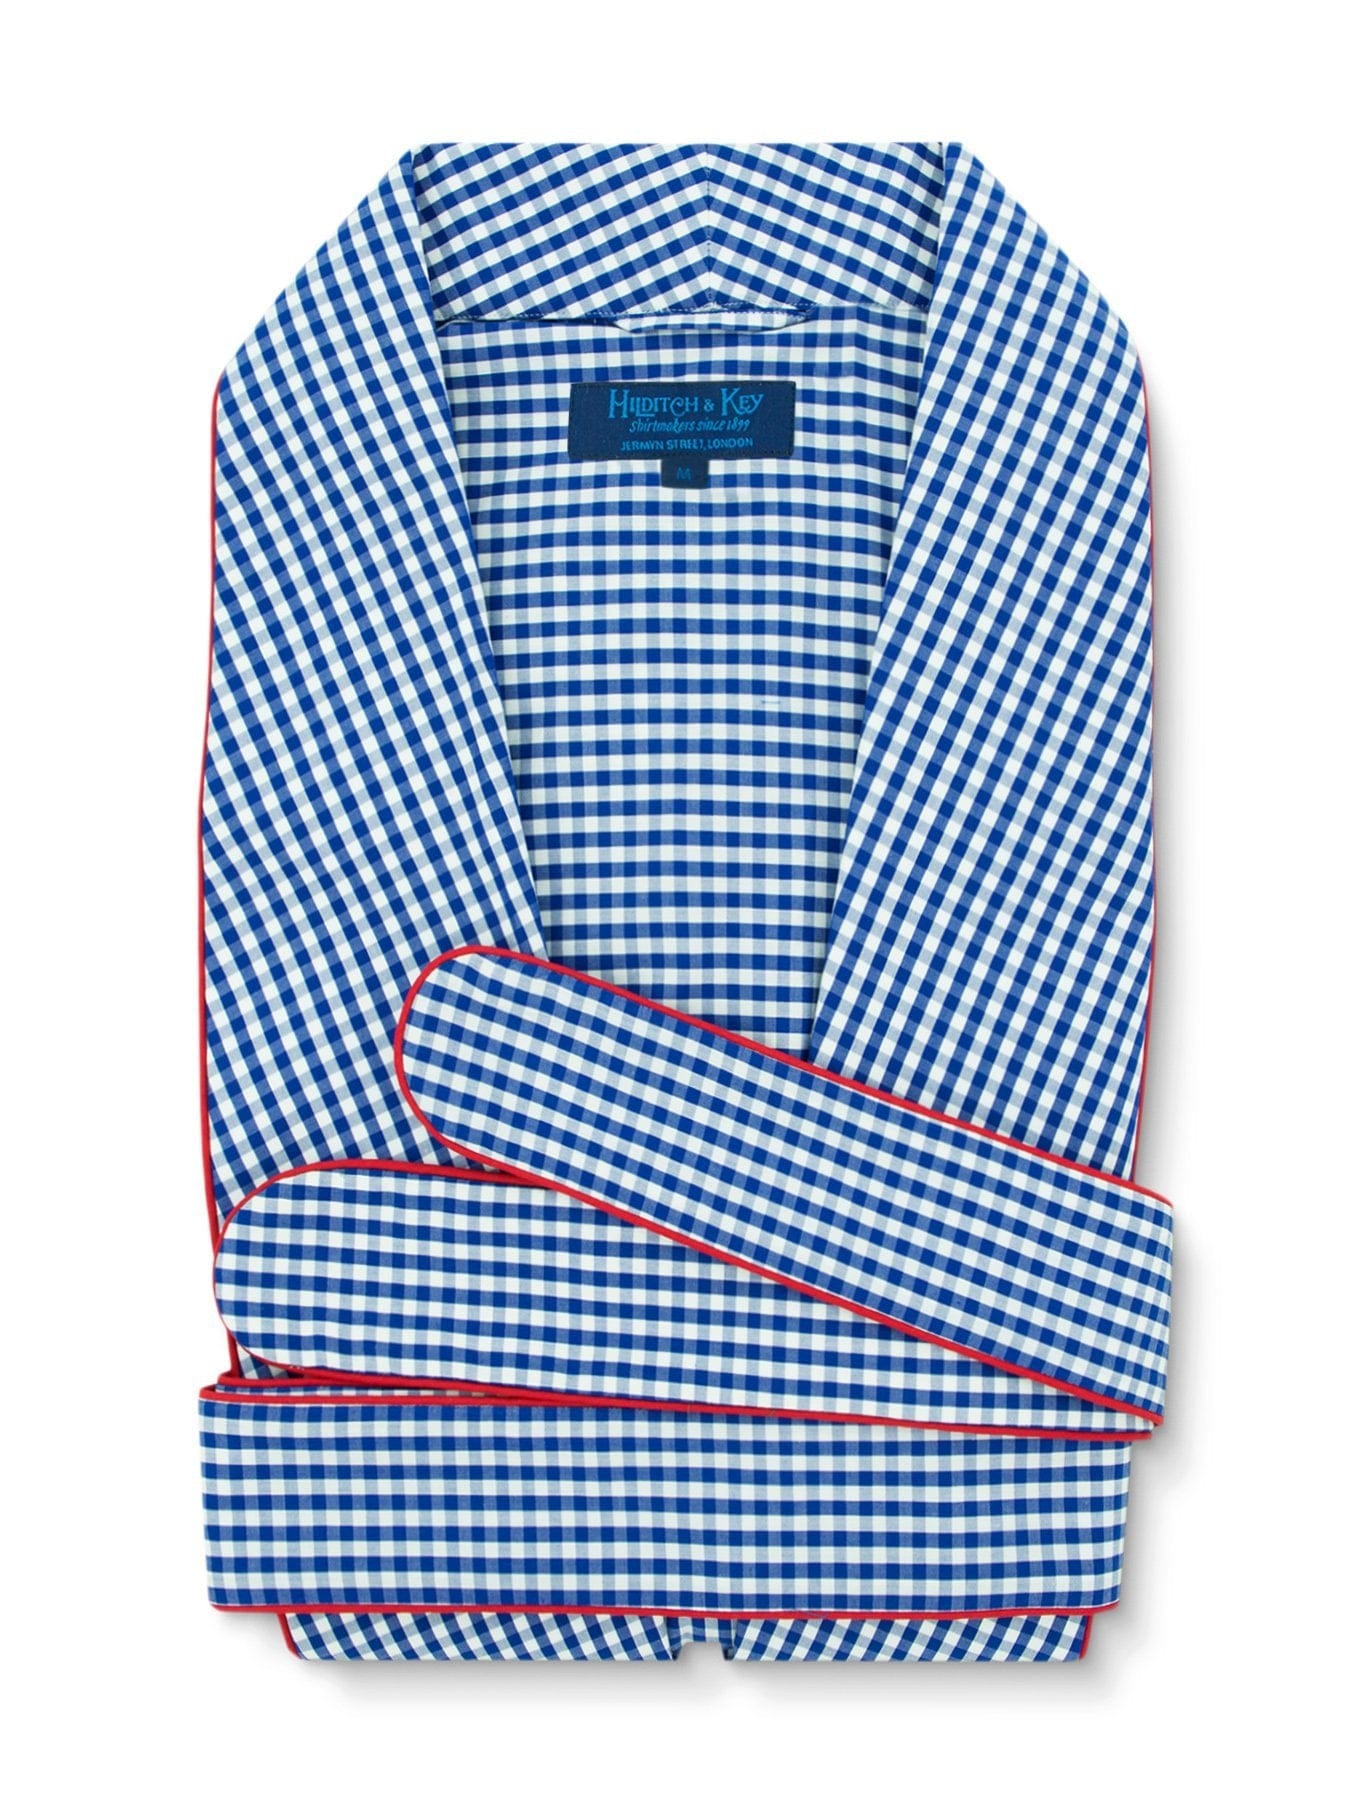 Classic Gown in a Navy & White Gingham Check Poplin Cotton with Red Piping - Hilditch & Key